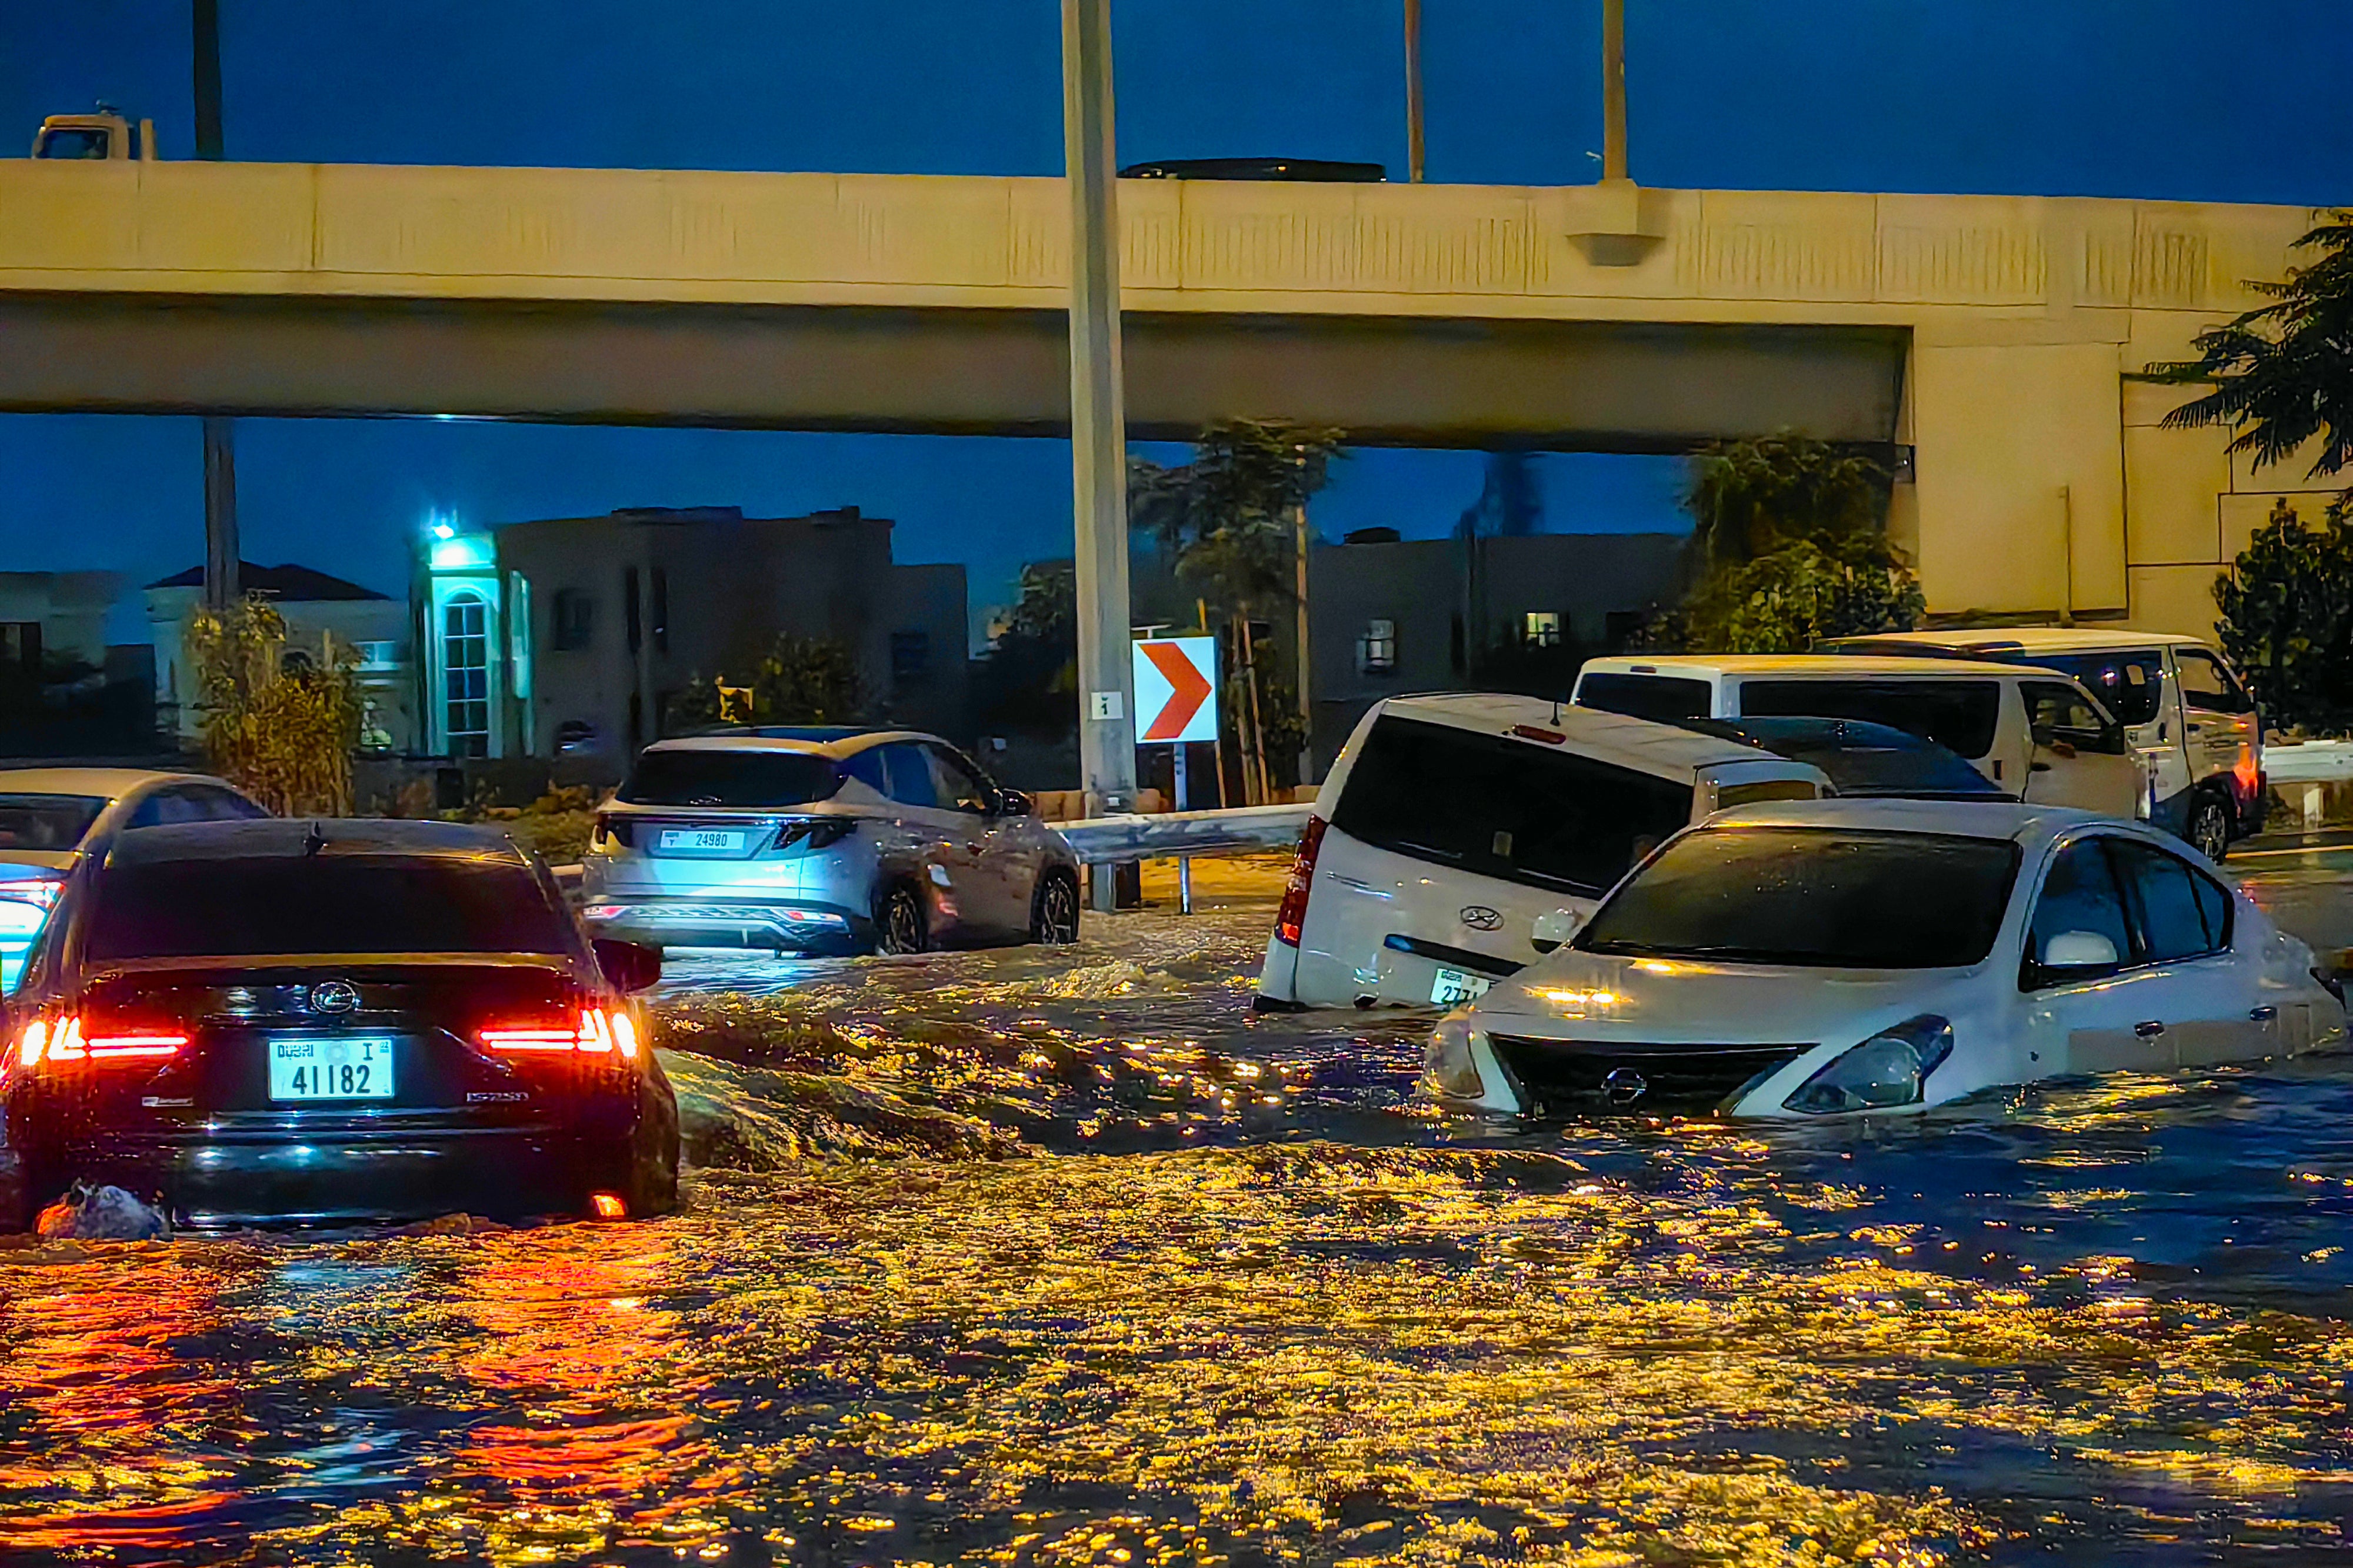 dubai struggles to return to normality after devastating floods as cars remain submerged in water